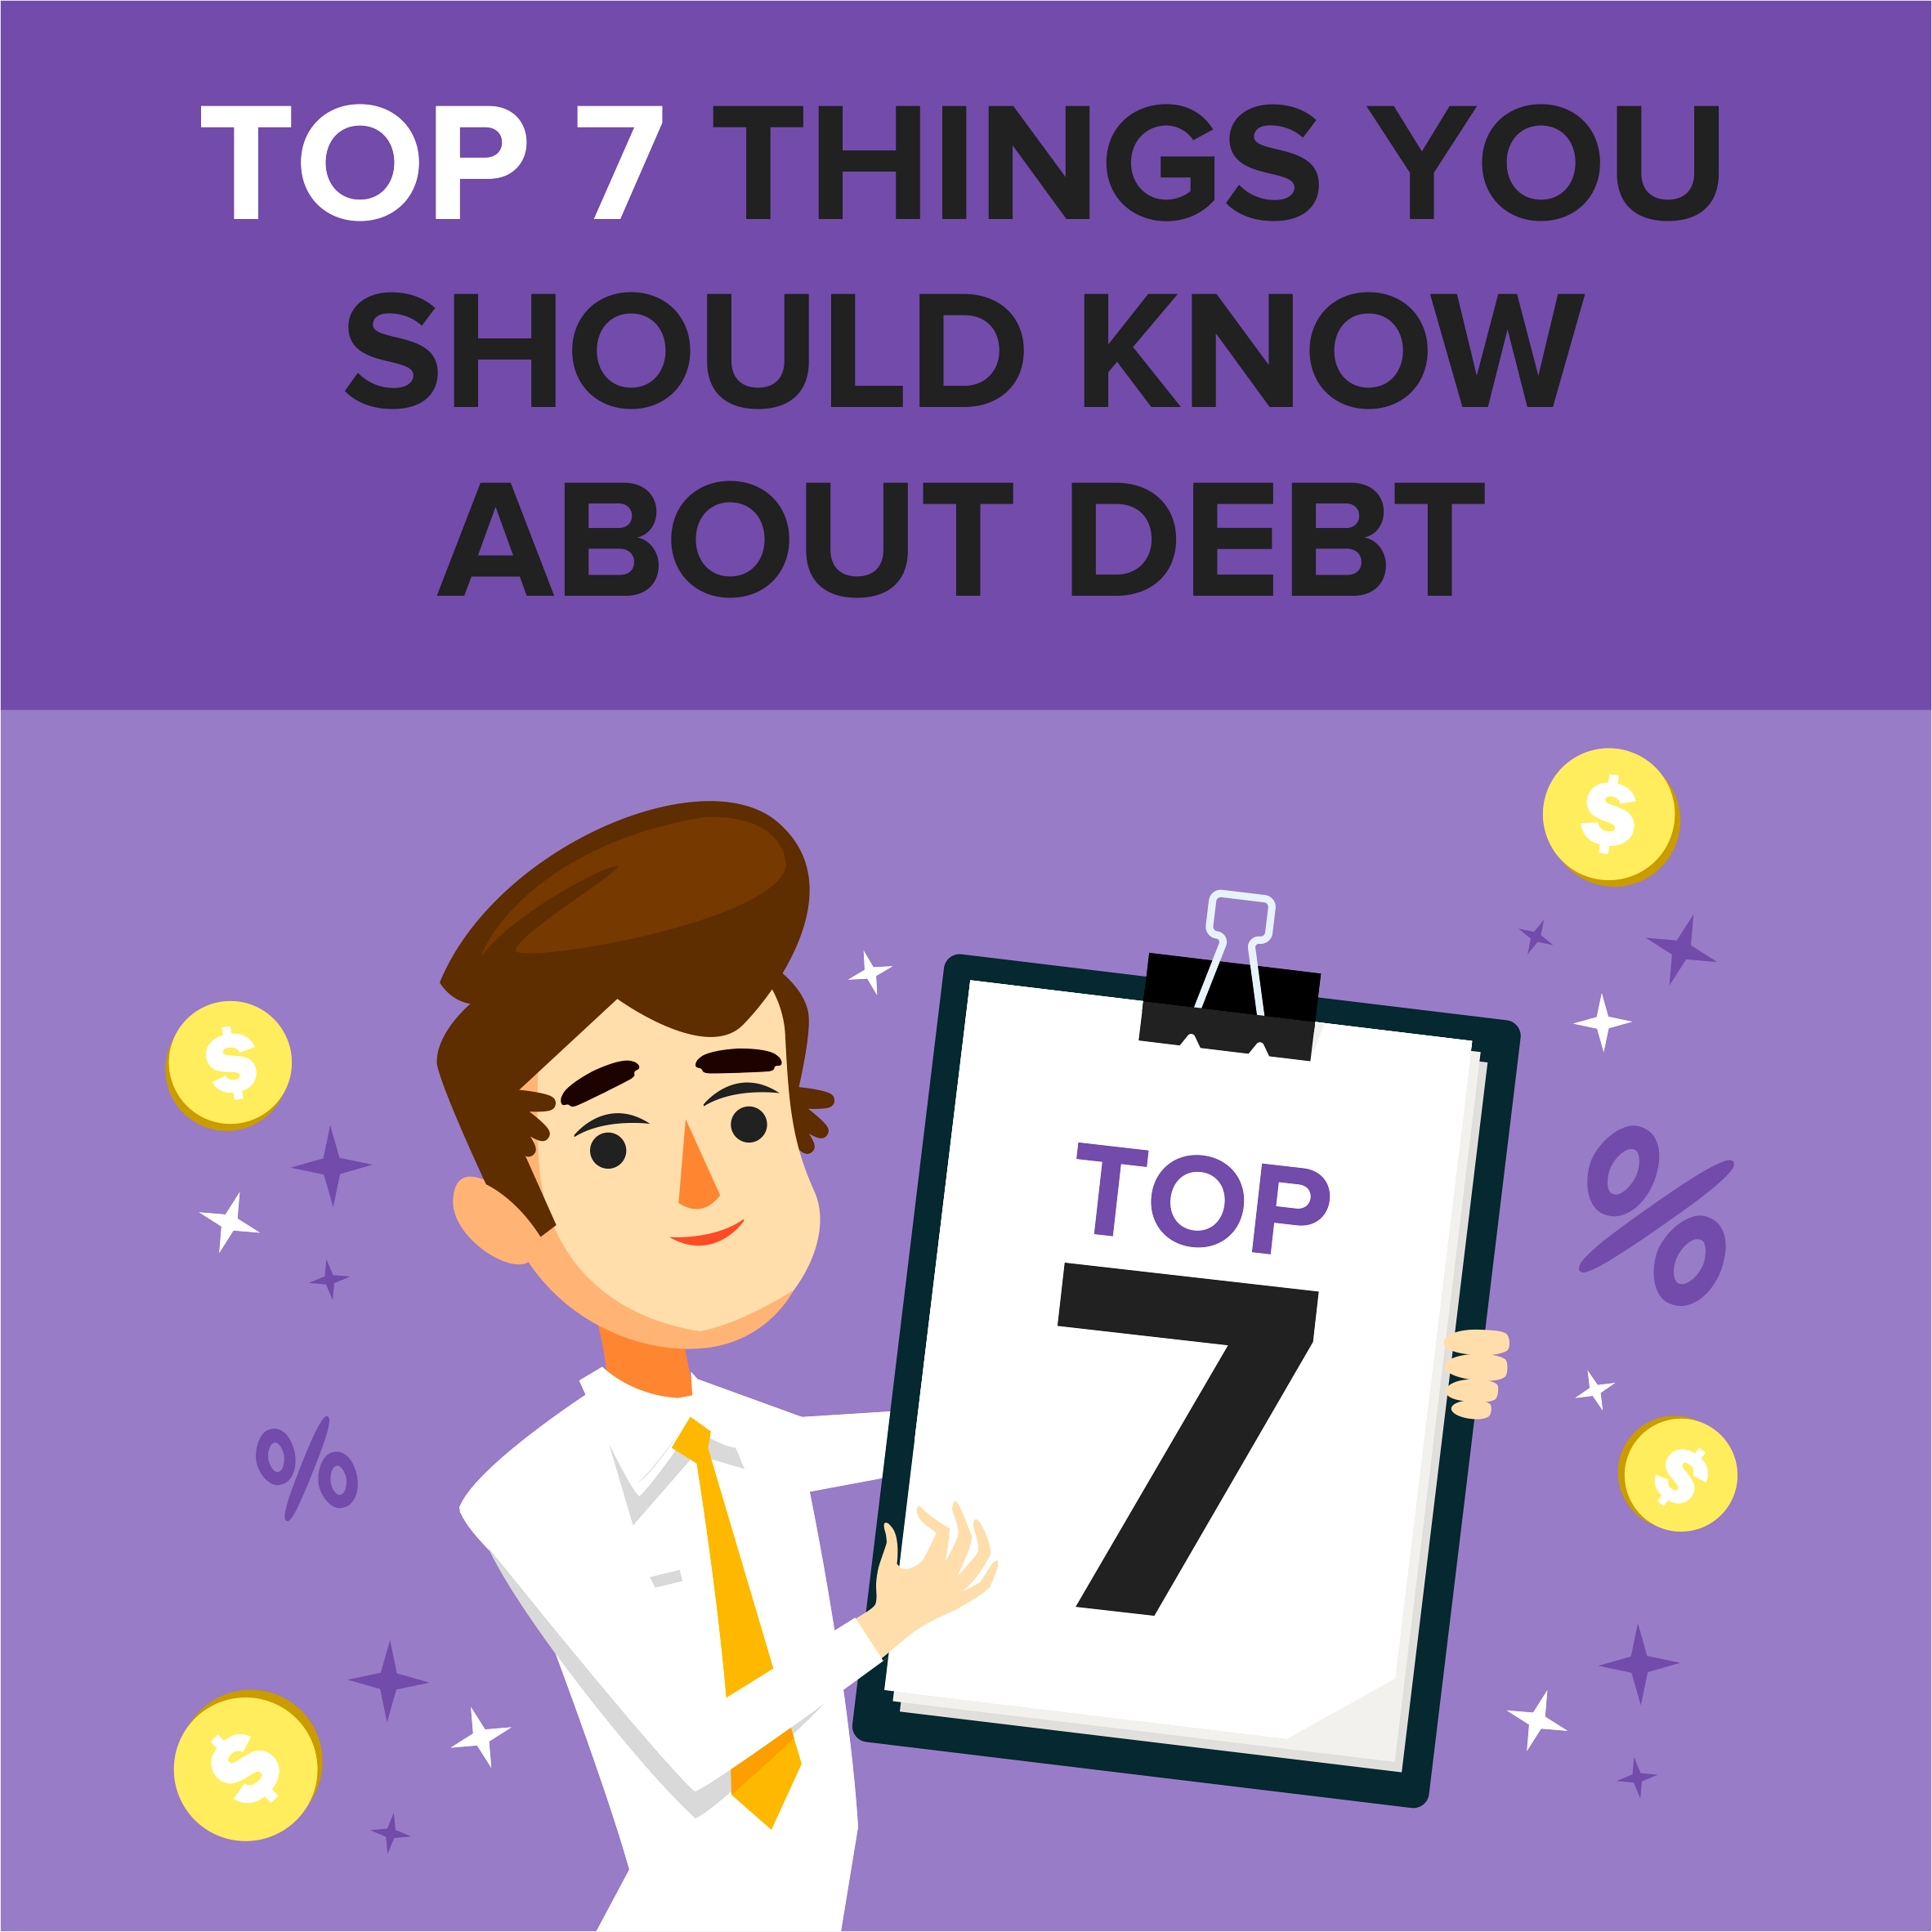 Top 7 Things You Should Know About Debt